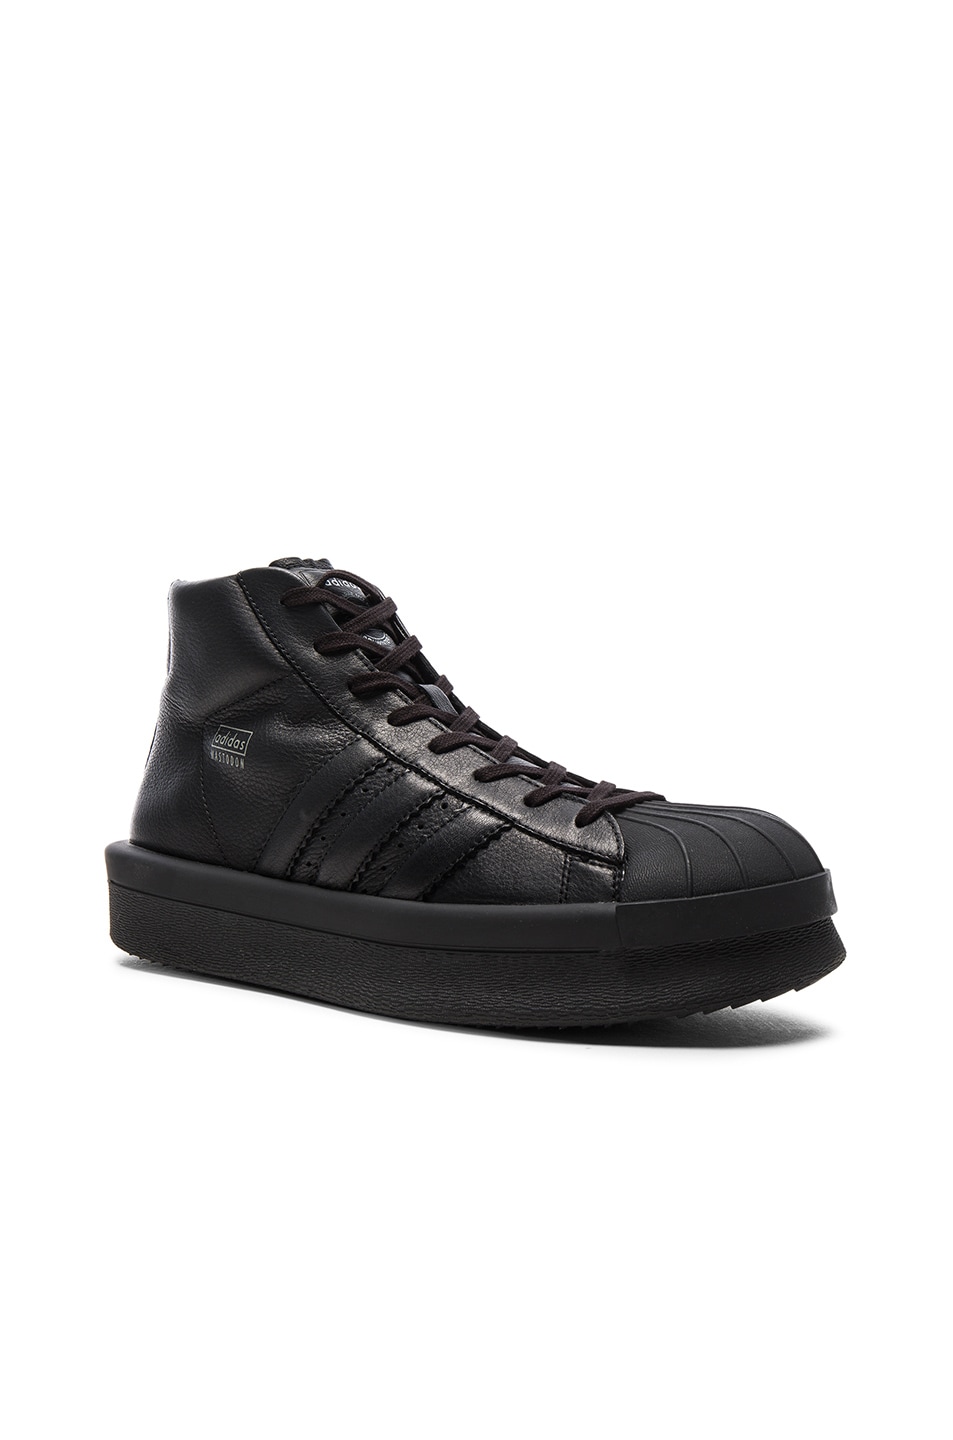 Image 1 of Rick Owens x Adidas Leather Pro Model Sneakers in Black